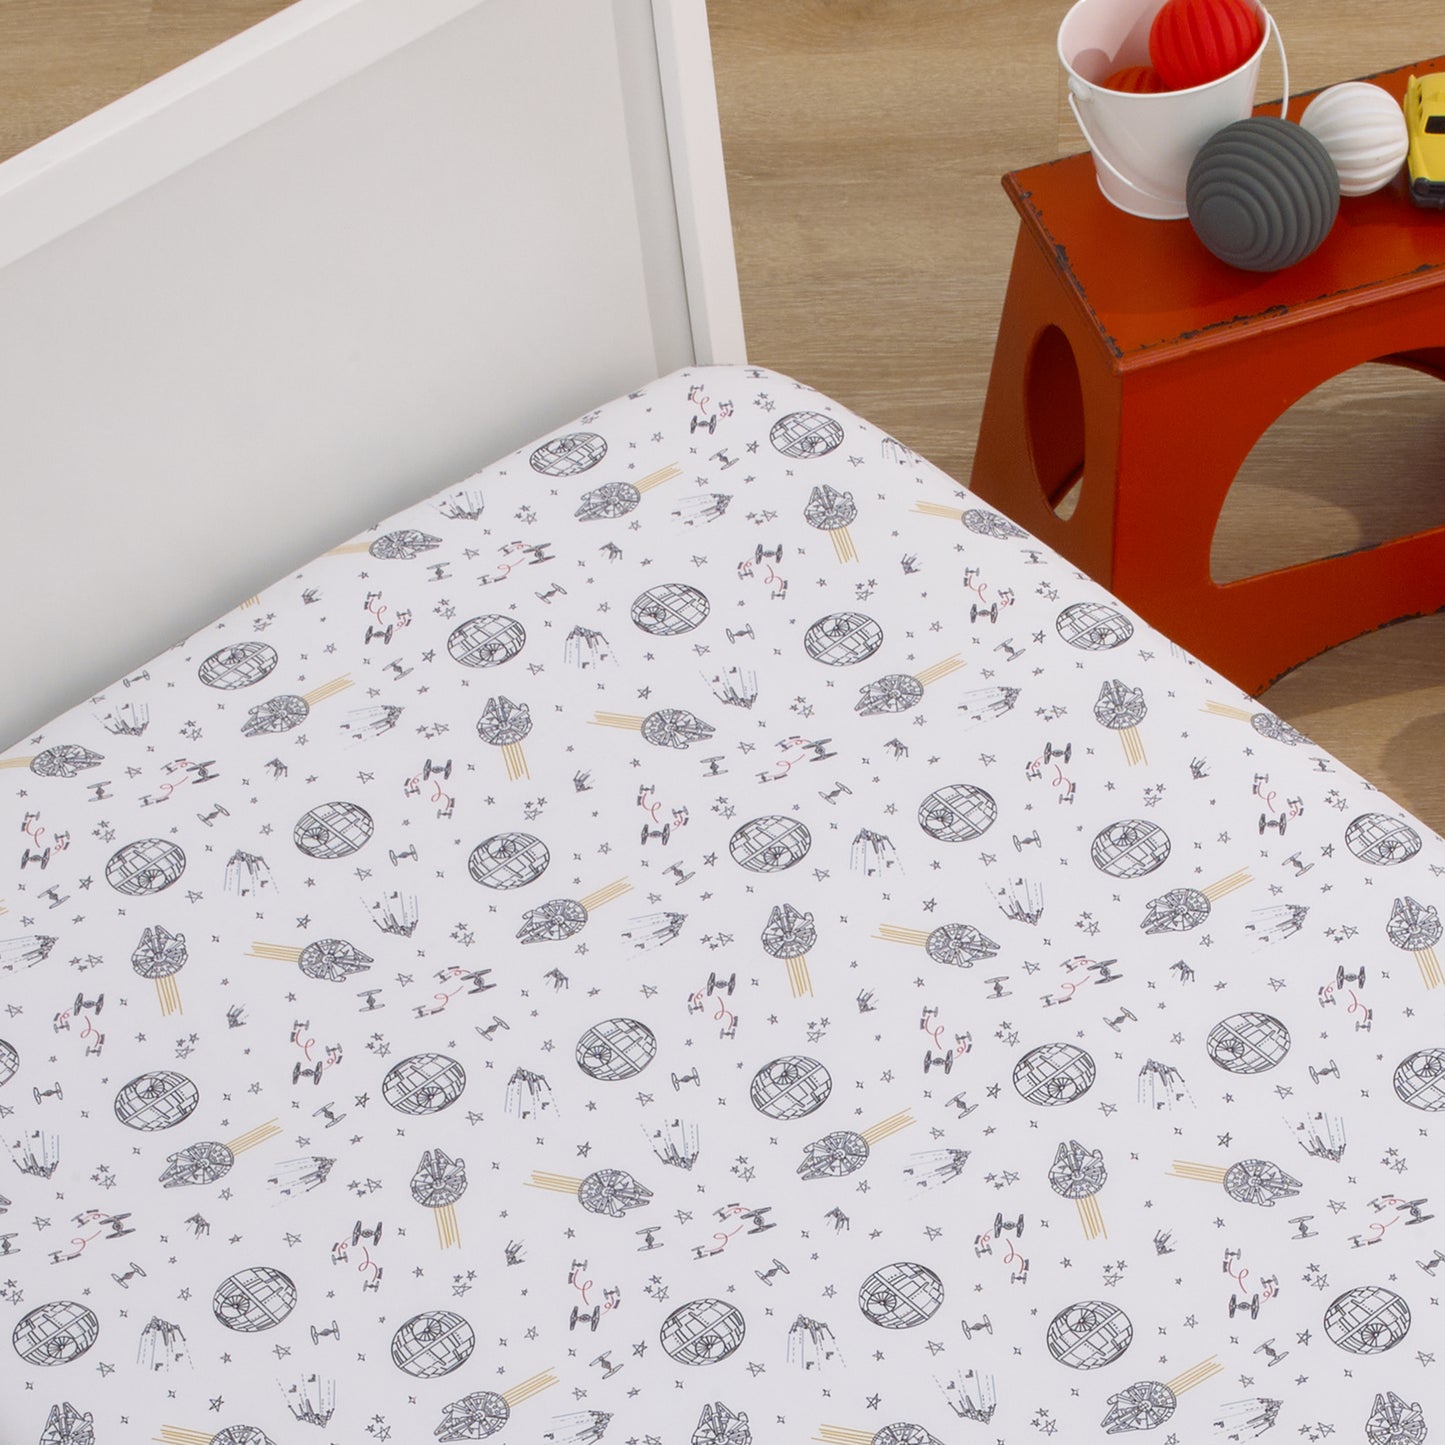 Star Wars May The Force Be With You White and Gold Millennium Falcon and Death Star Nursery Fitted Crib Sheet